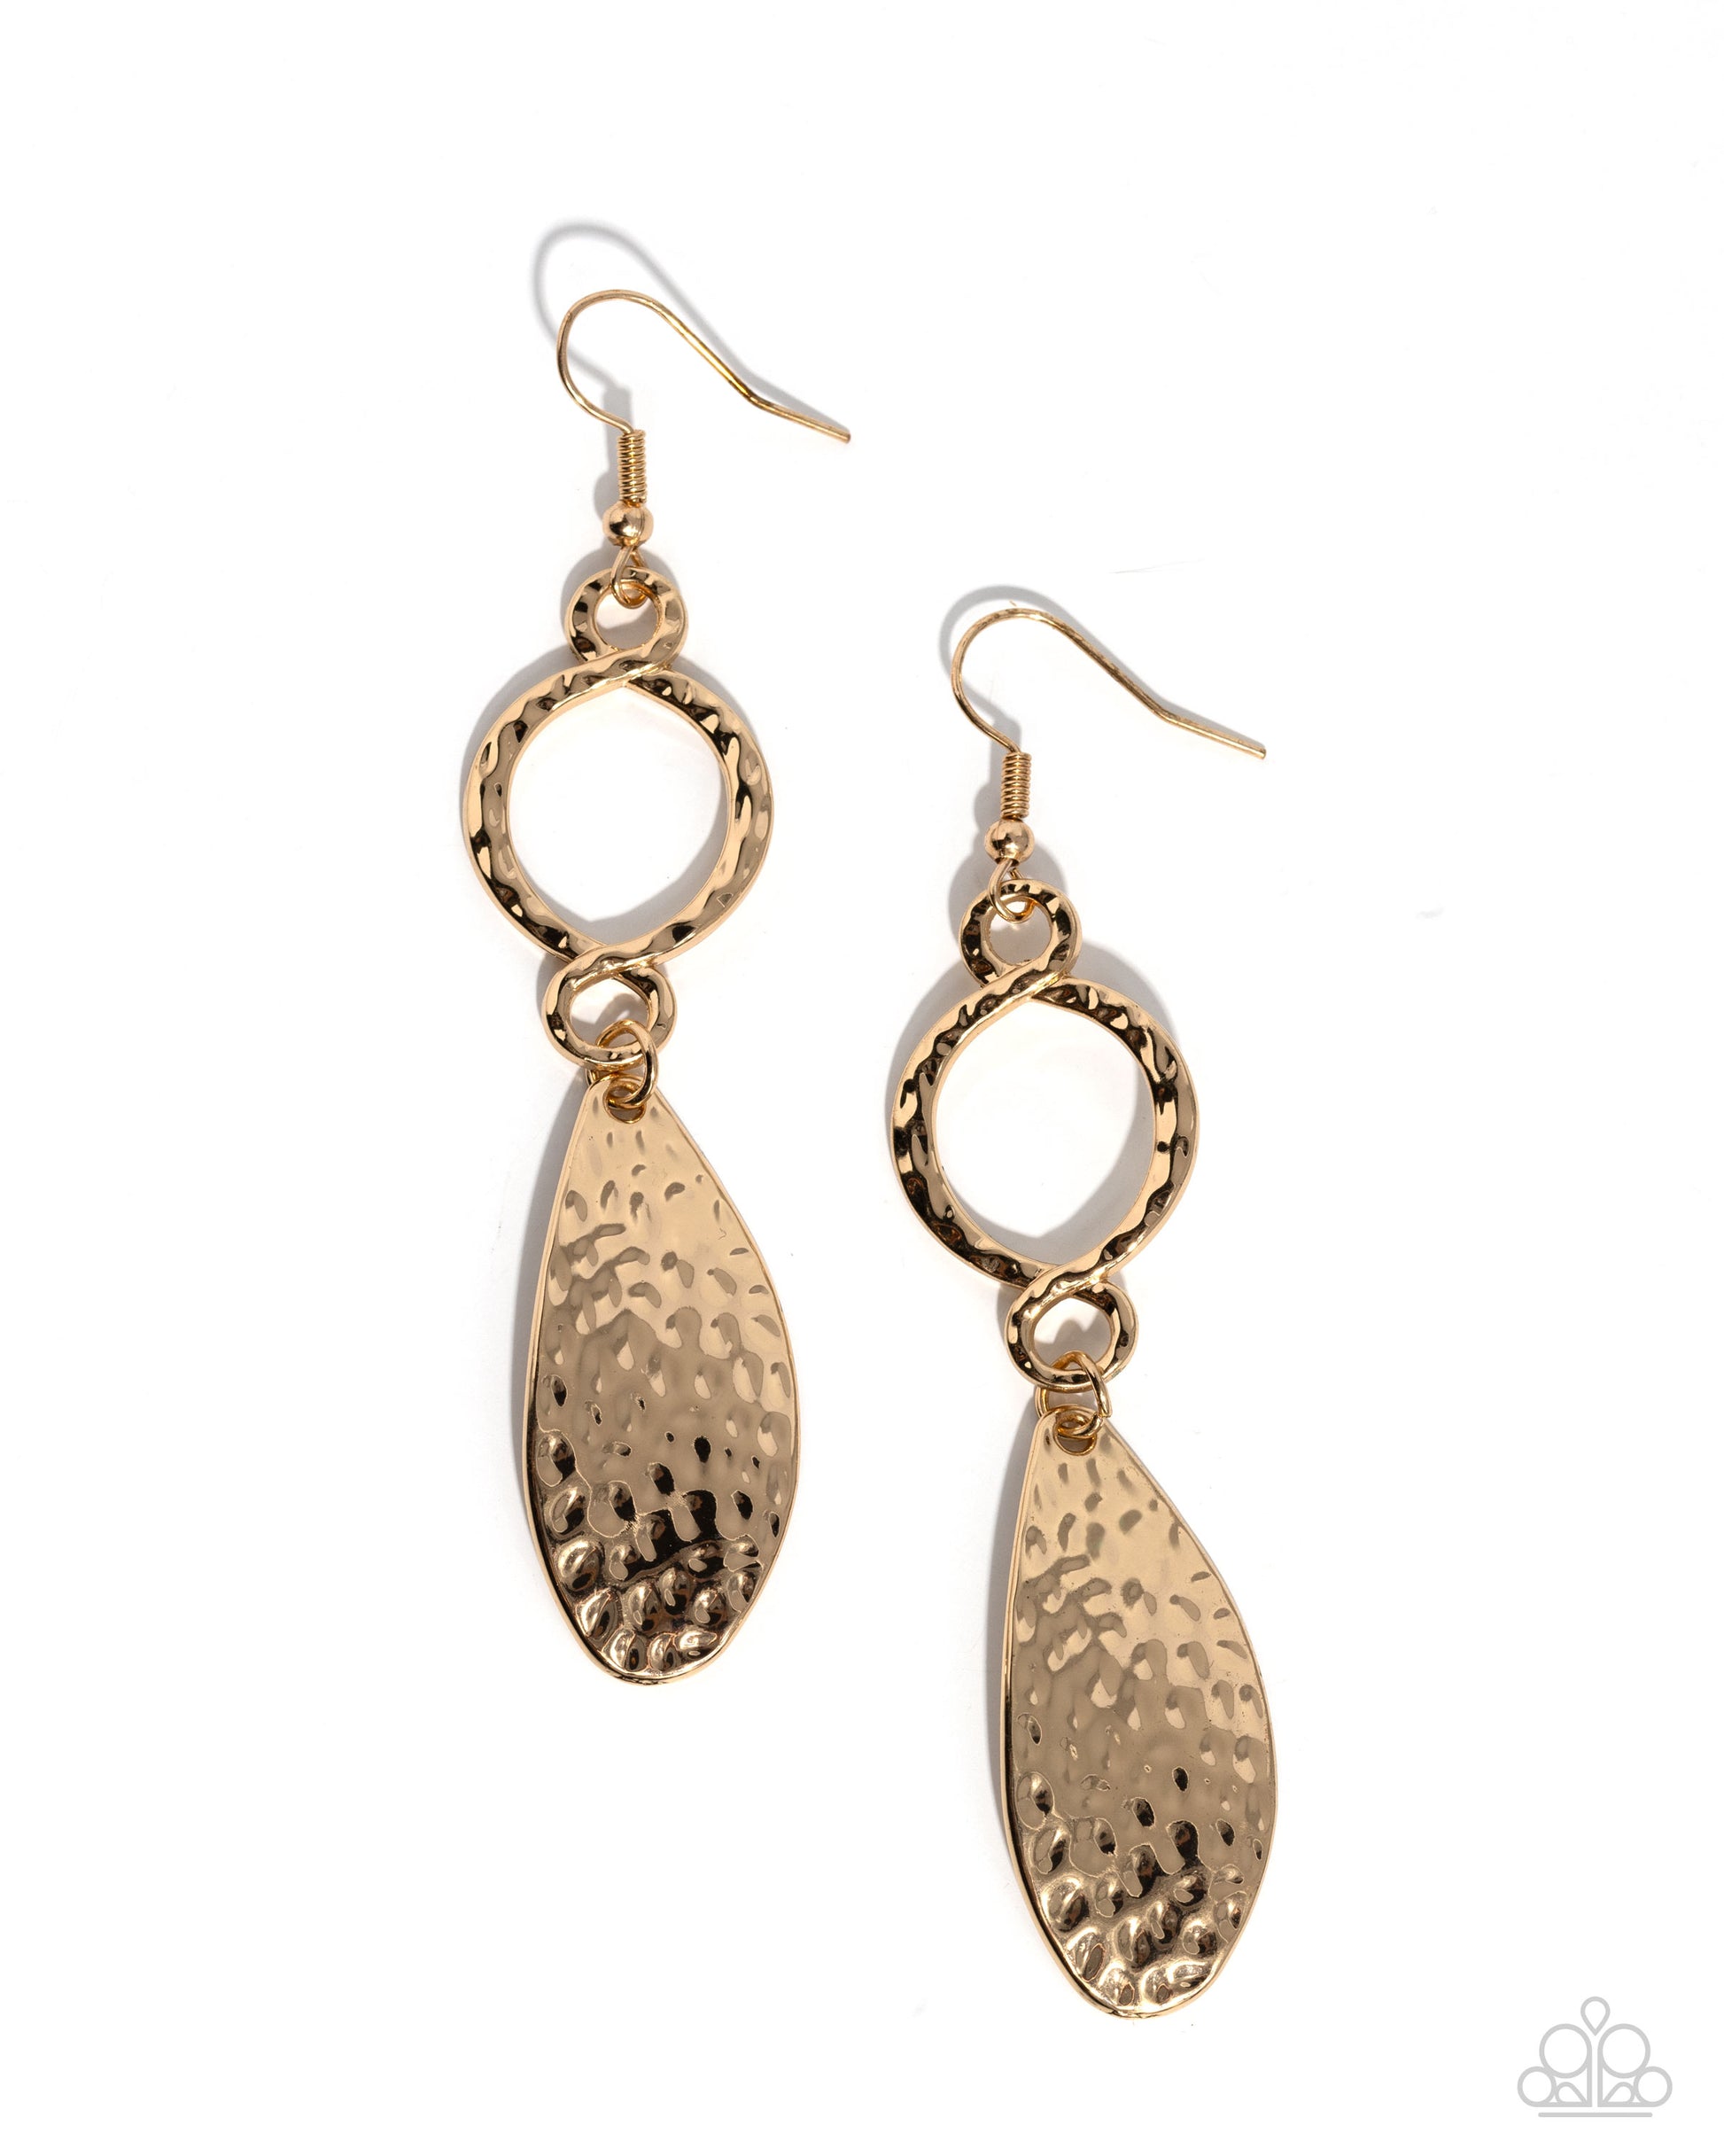 <p>Hammered gold bars swoop into a chic hoop that links with a hammered gold oval plate, creating a refined lure. Earring attaches to a standard fishhook fitting.</p> <p><i> Sold as one pair of earrings.</i></p>